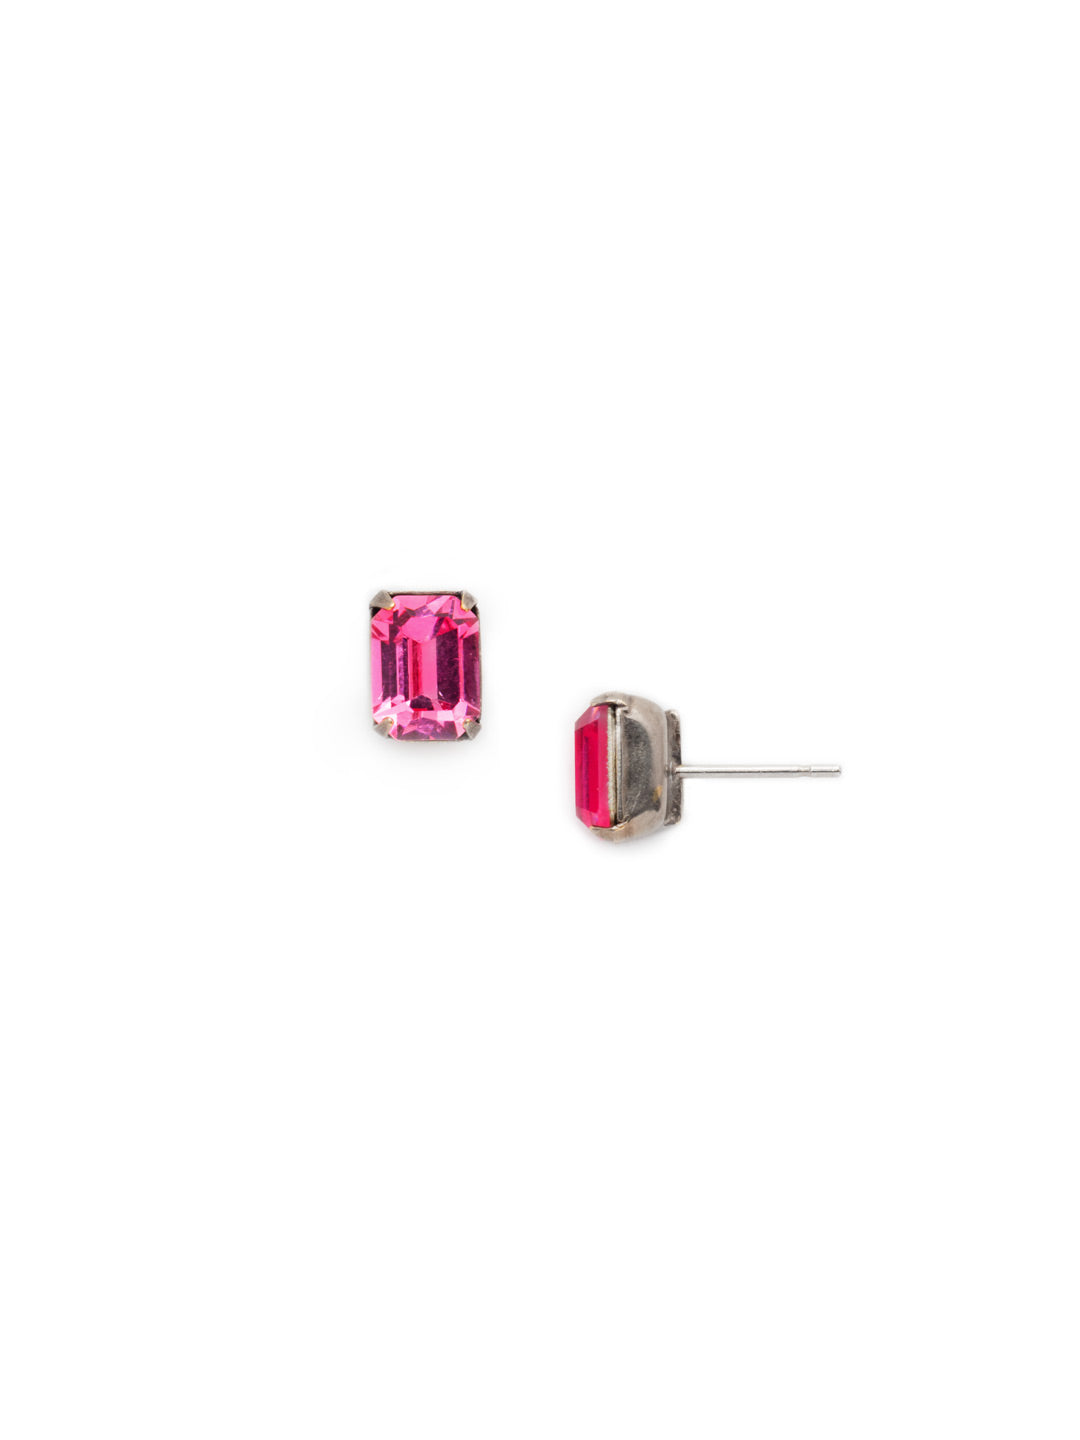 Mini Emerald Cut Stud Earrings - EBY42ASWDW - Simply sophisticated. The mini emerald cut stud earrings can be worn alone or paired with anything for an extra accent to any wardrobe. From Sorrelli's Wild Watermelon collection in our Antique Silver-tone finish.